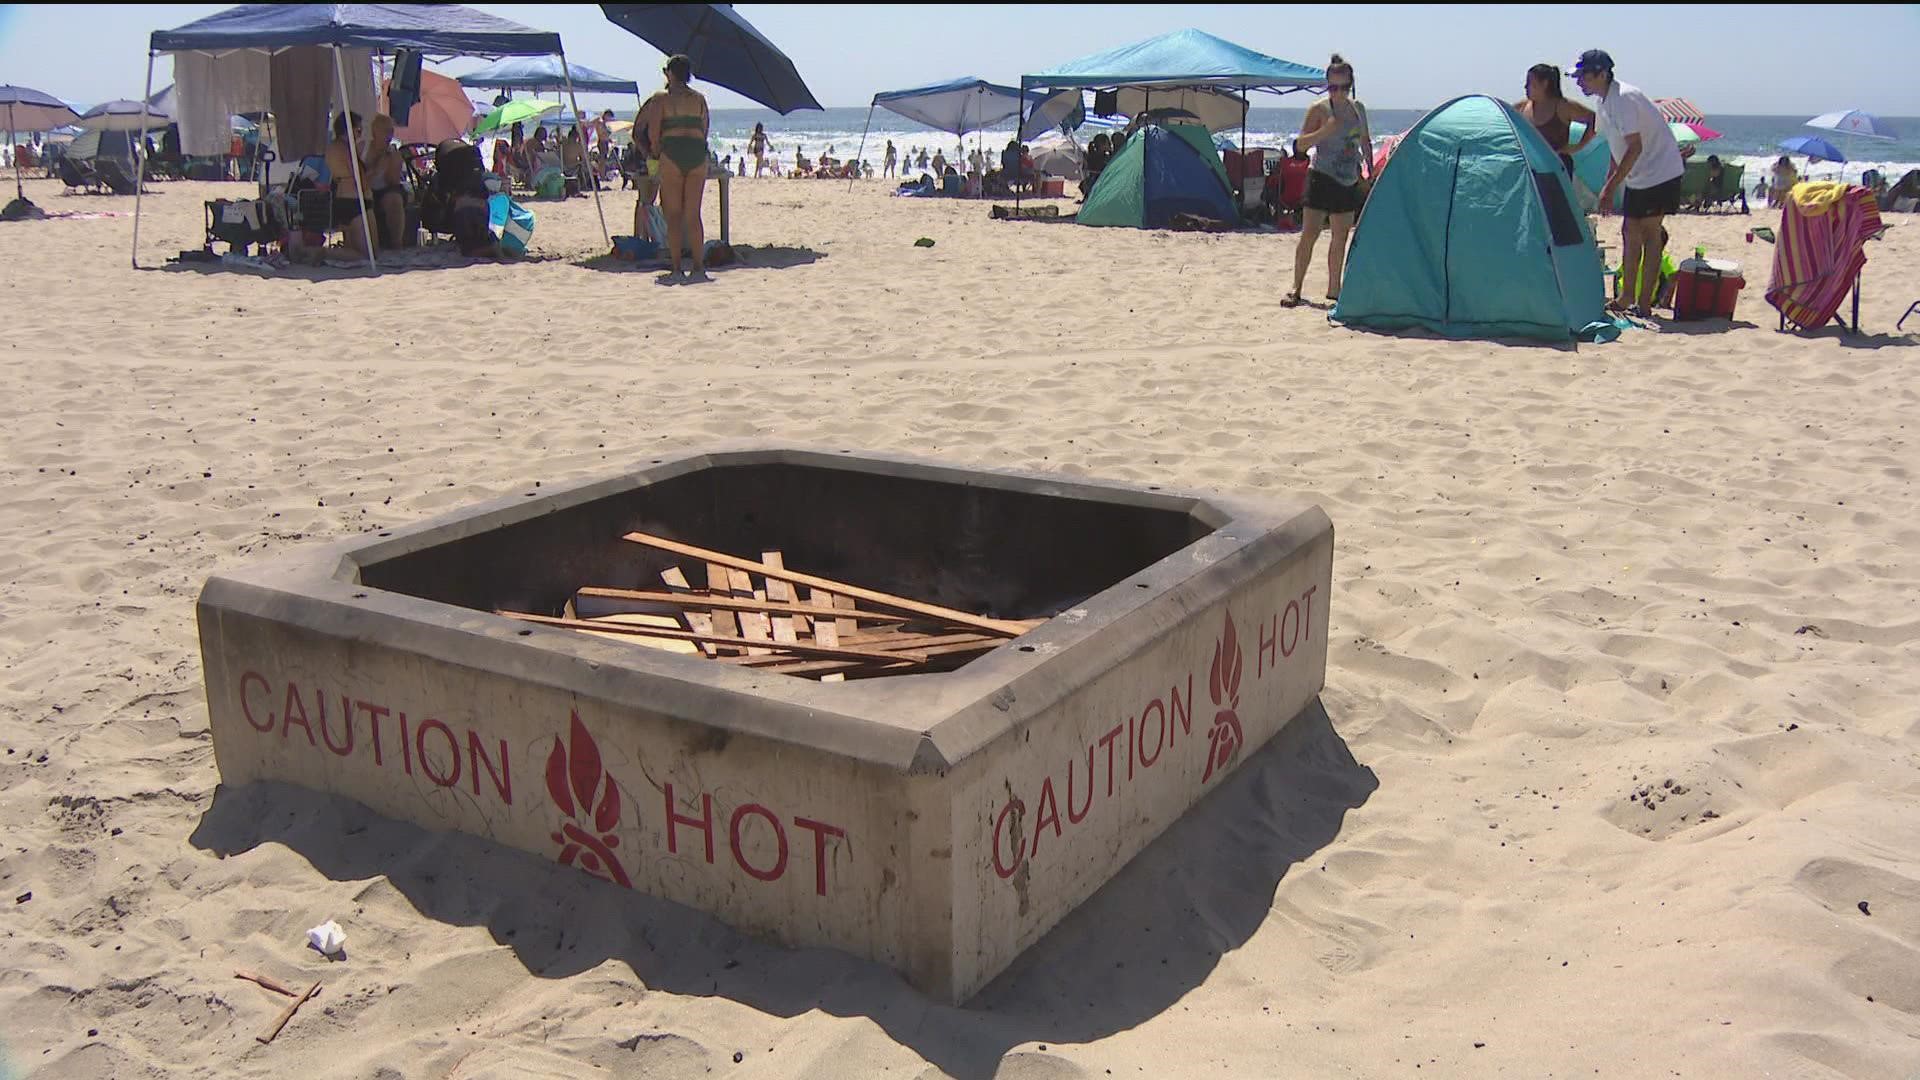 Mission Beach is very crowded on Labor Day, even more so due to the extreme heat wave. San Diego Police have some important safety reminders.